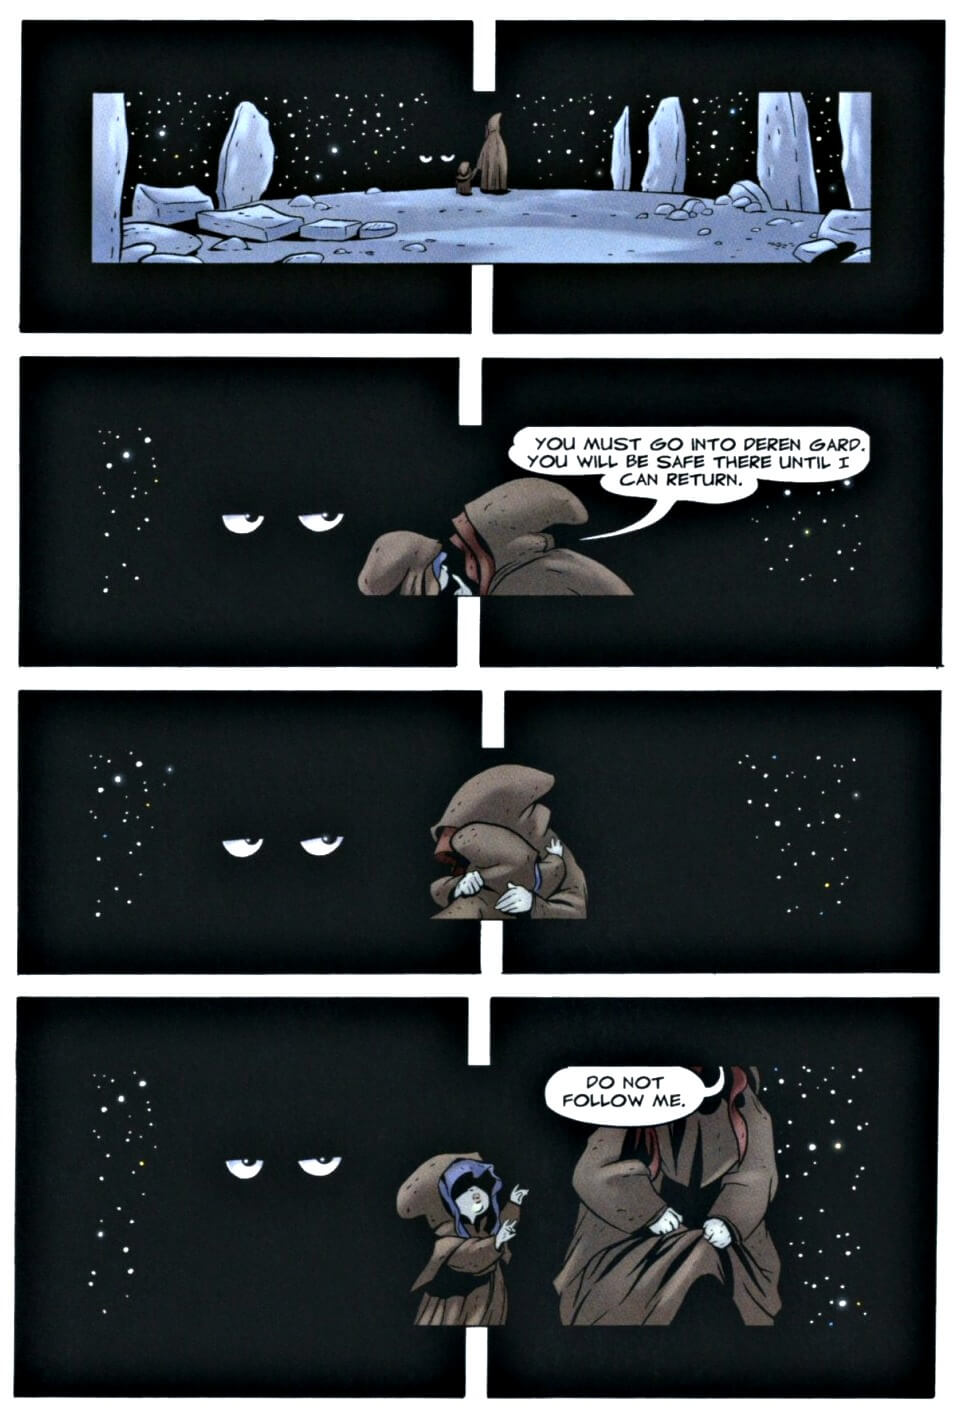 page 10 chapter 1 of bone 9 crown of horns graphic novel